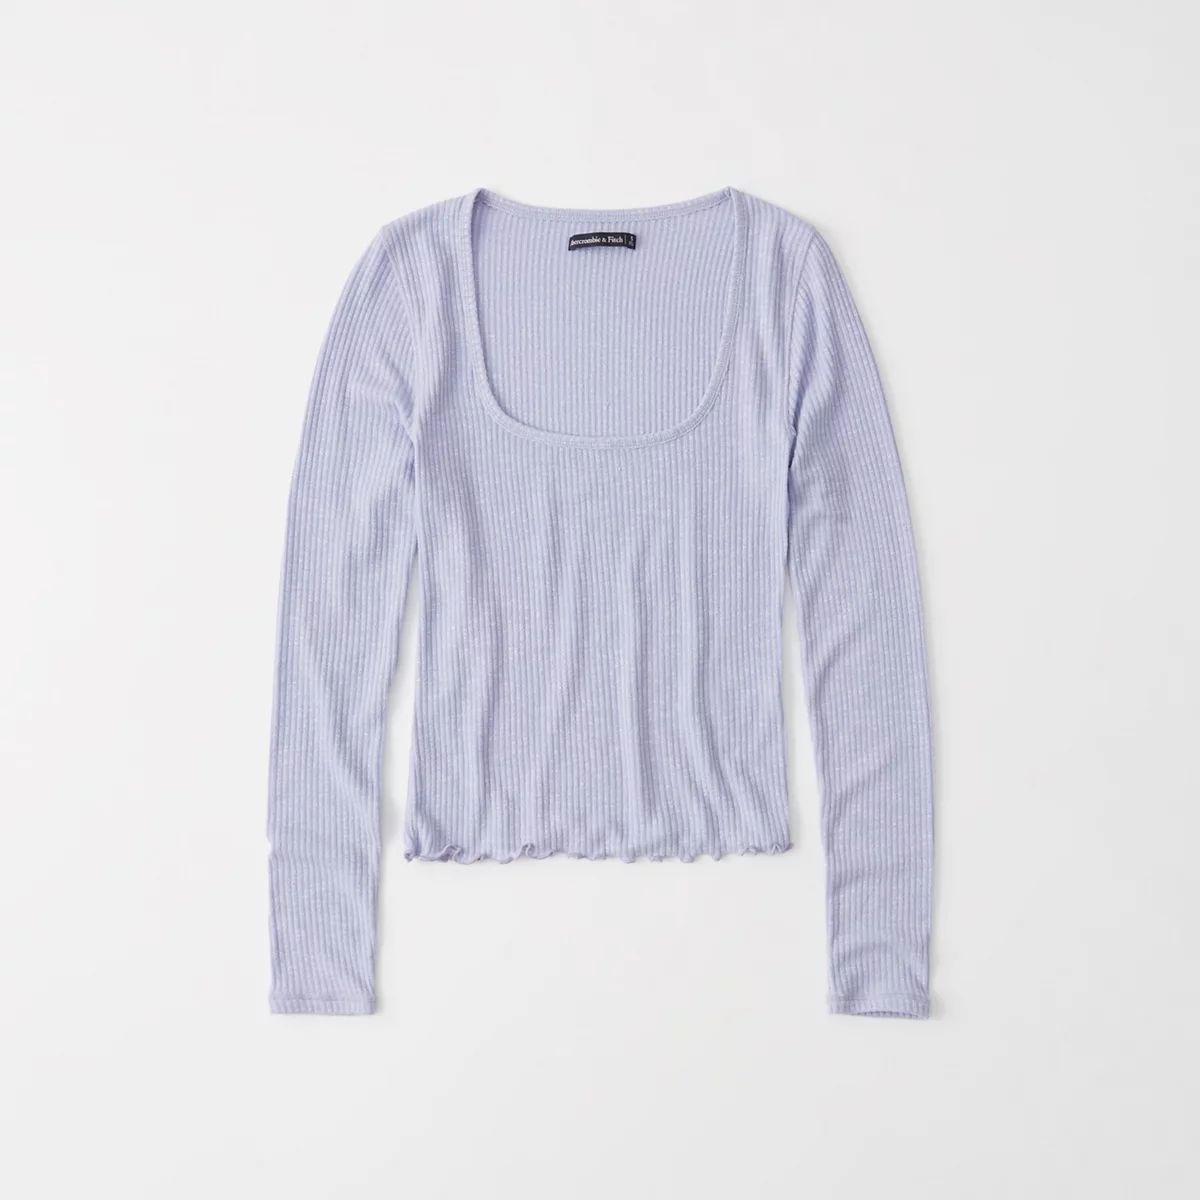 Long-Sleeve Square Neck Tee | Abercrombie & Fitch US & UK